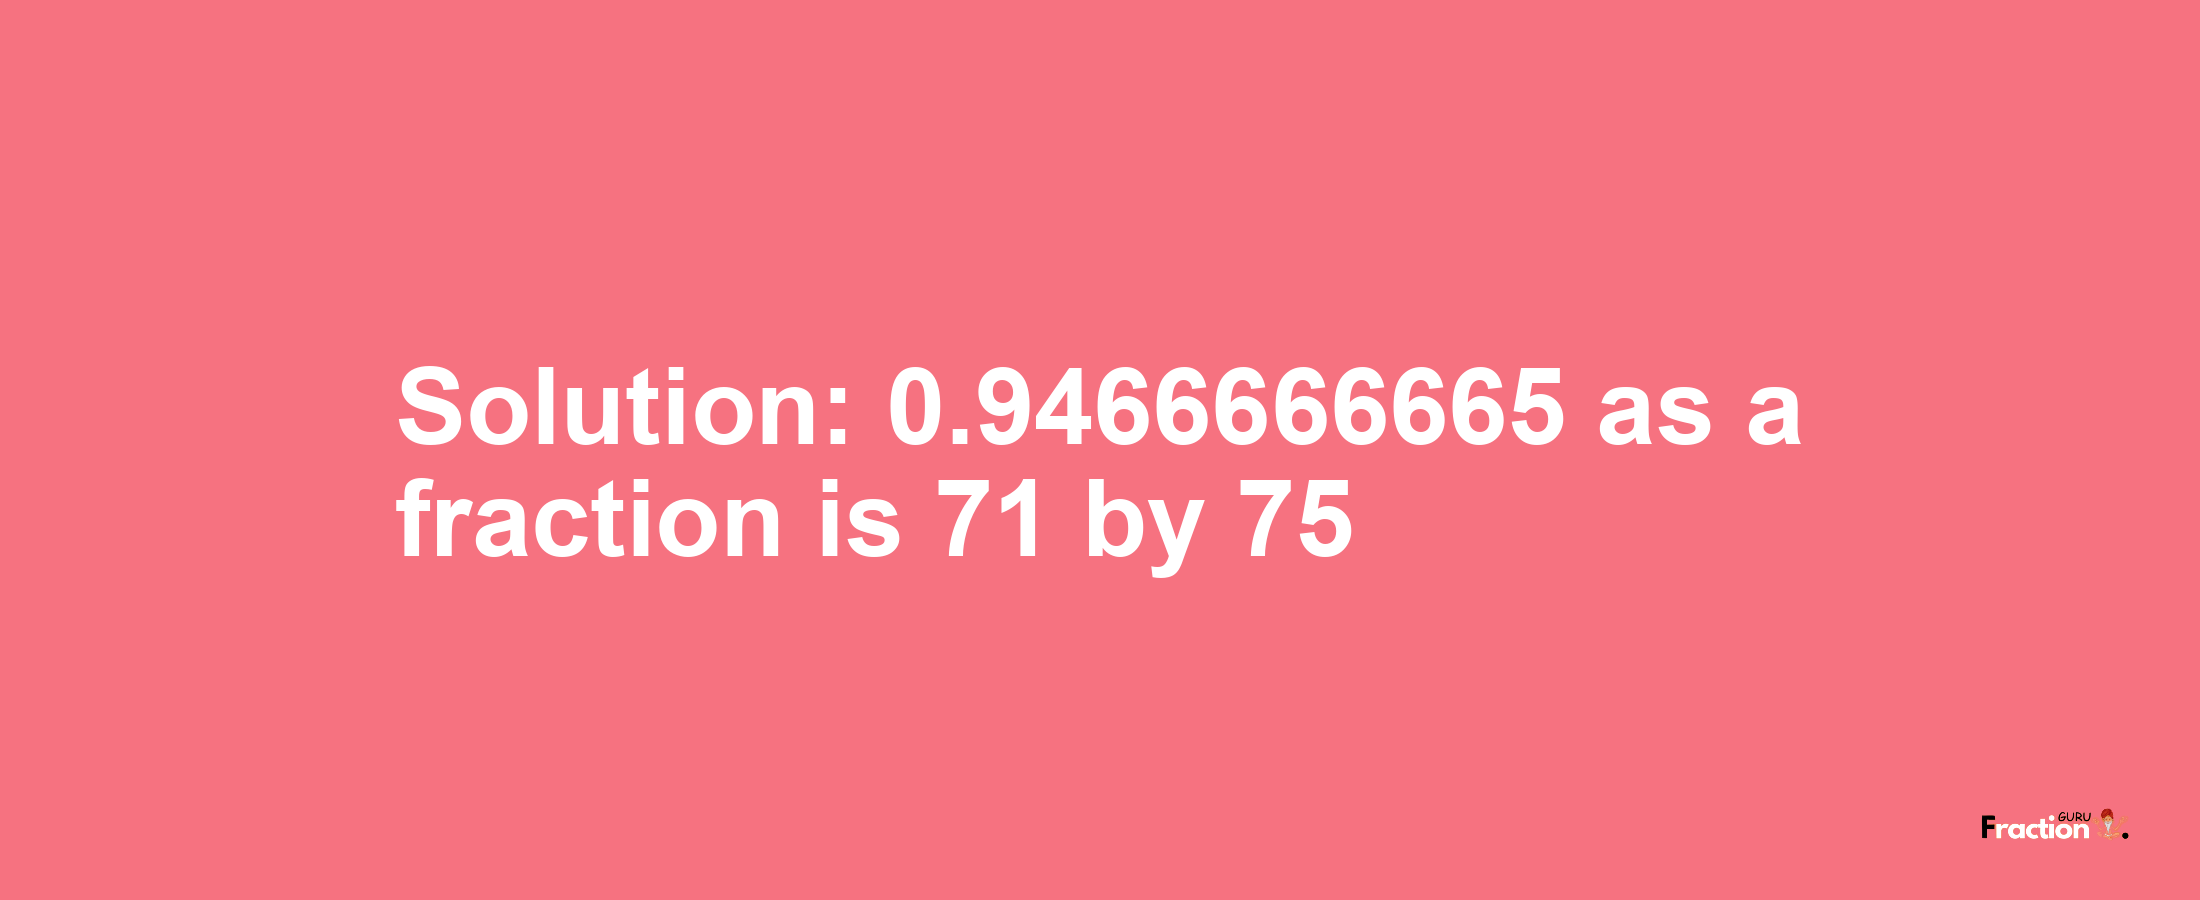 Solution:0.9466666665 as a fraction is 71/75